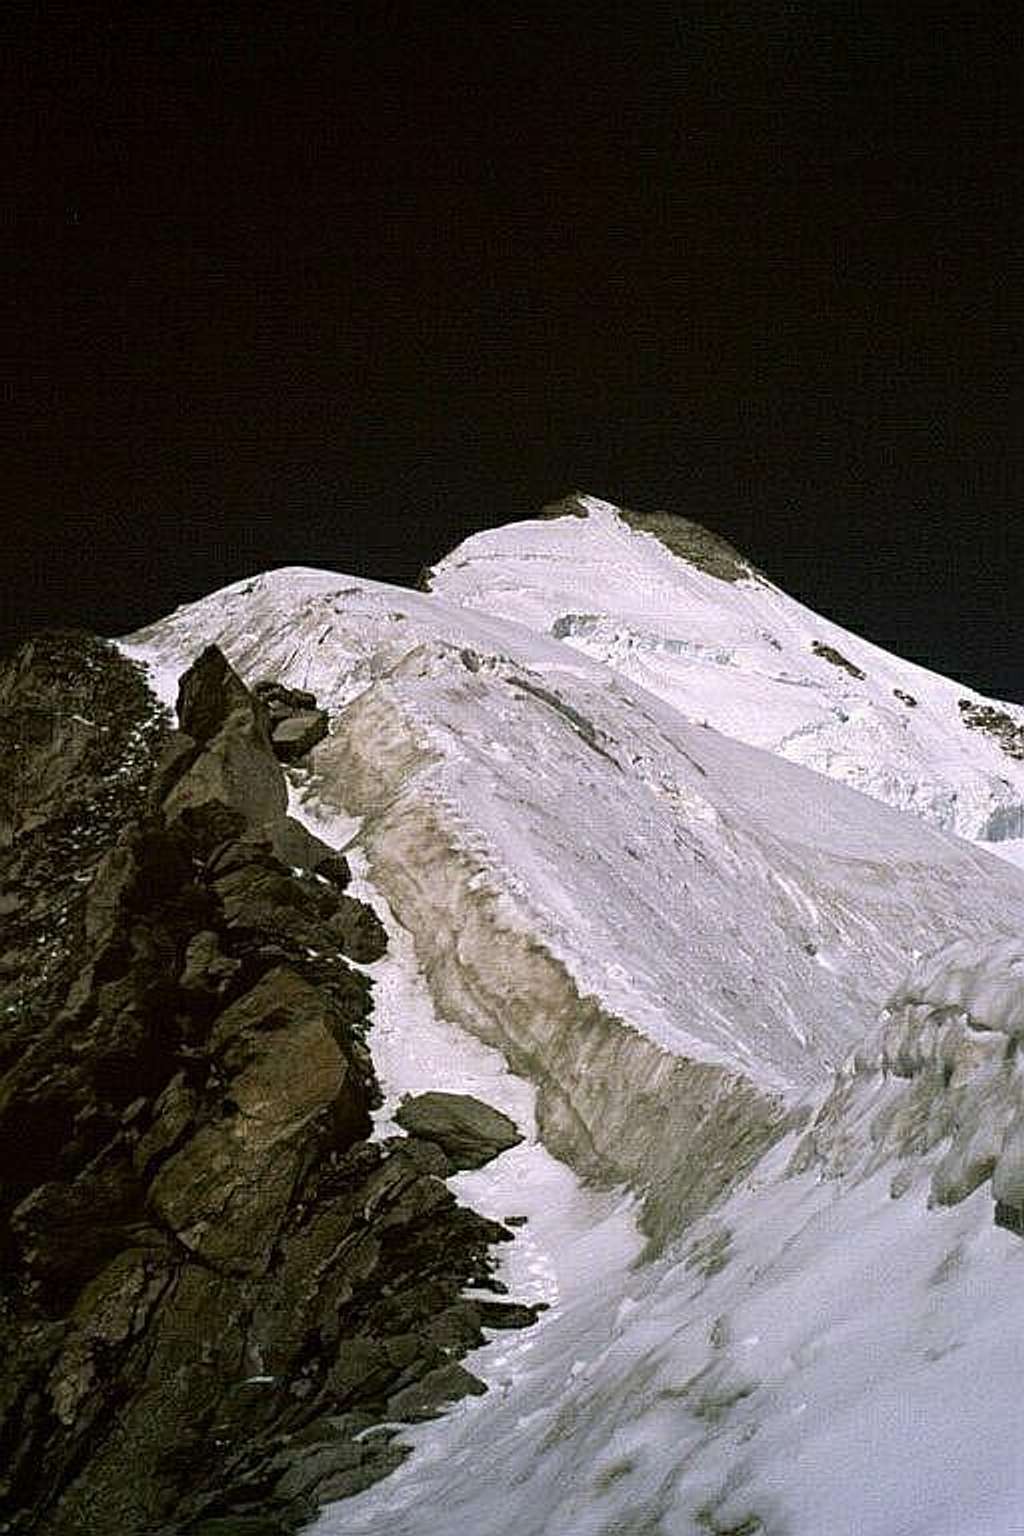 Snow/ice part of the E Rigde of Weisshorn